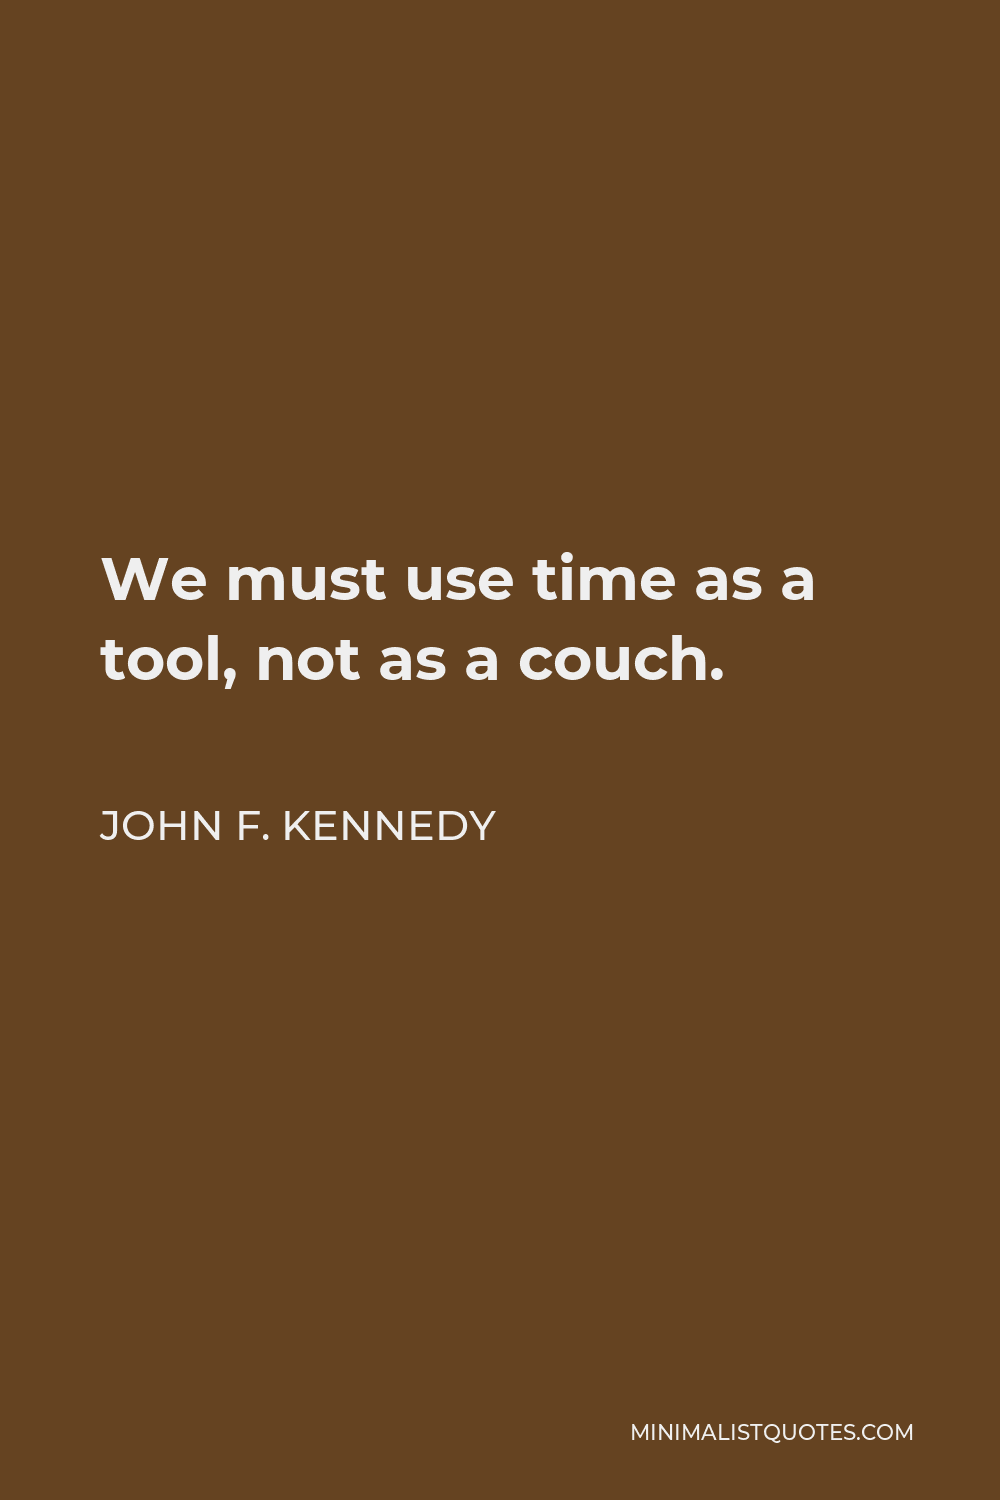 John F. Kennedy Quote - We must use time as a tool, not as a couch.